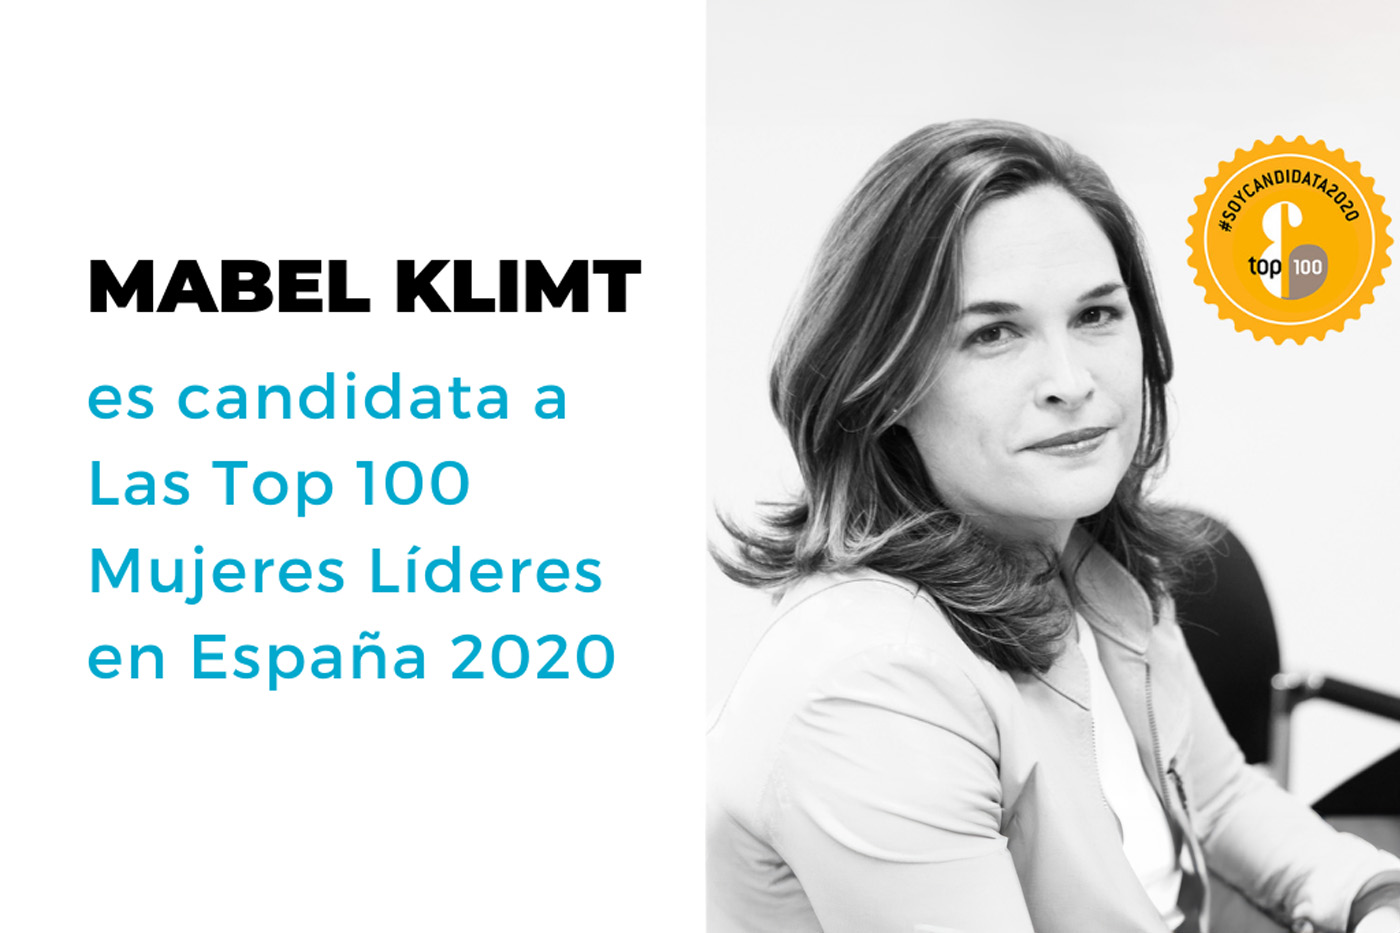 Mabel Klimt is a candidate for the top 100 leading women in Spain 2020